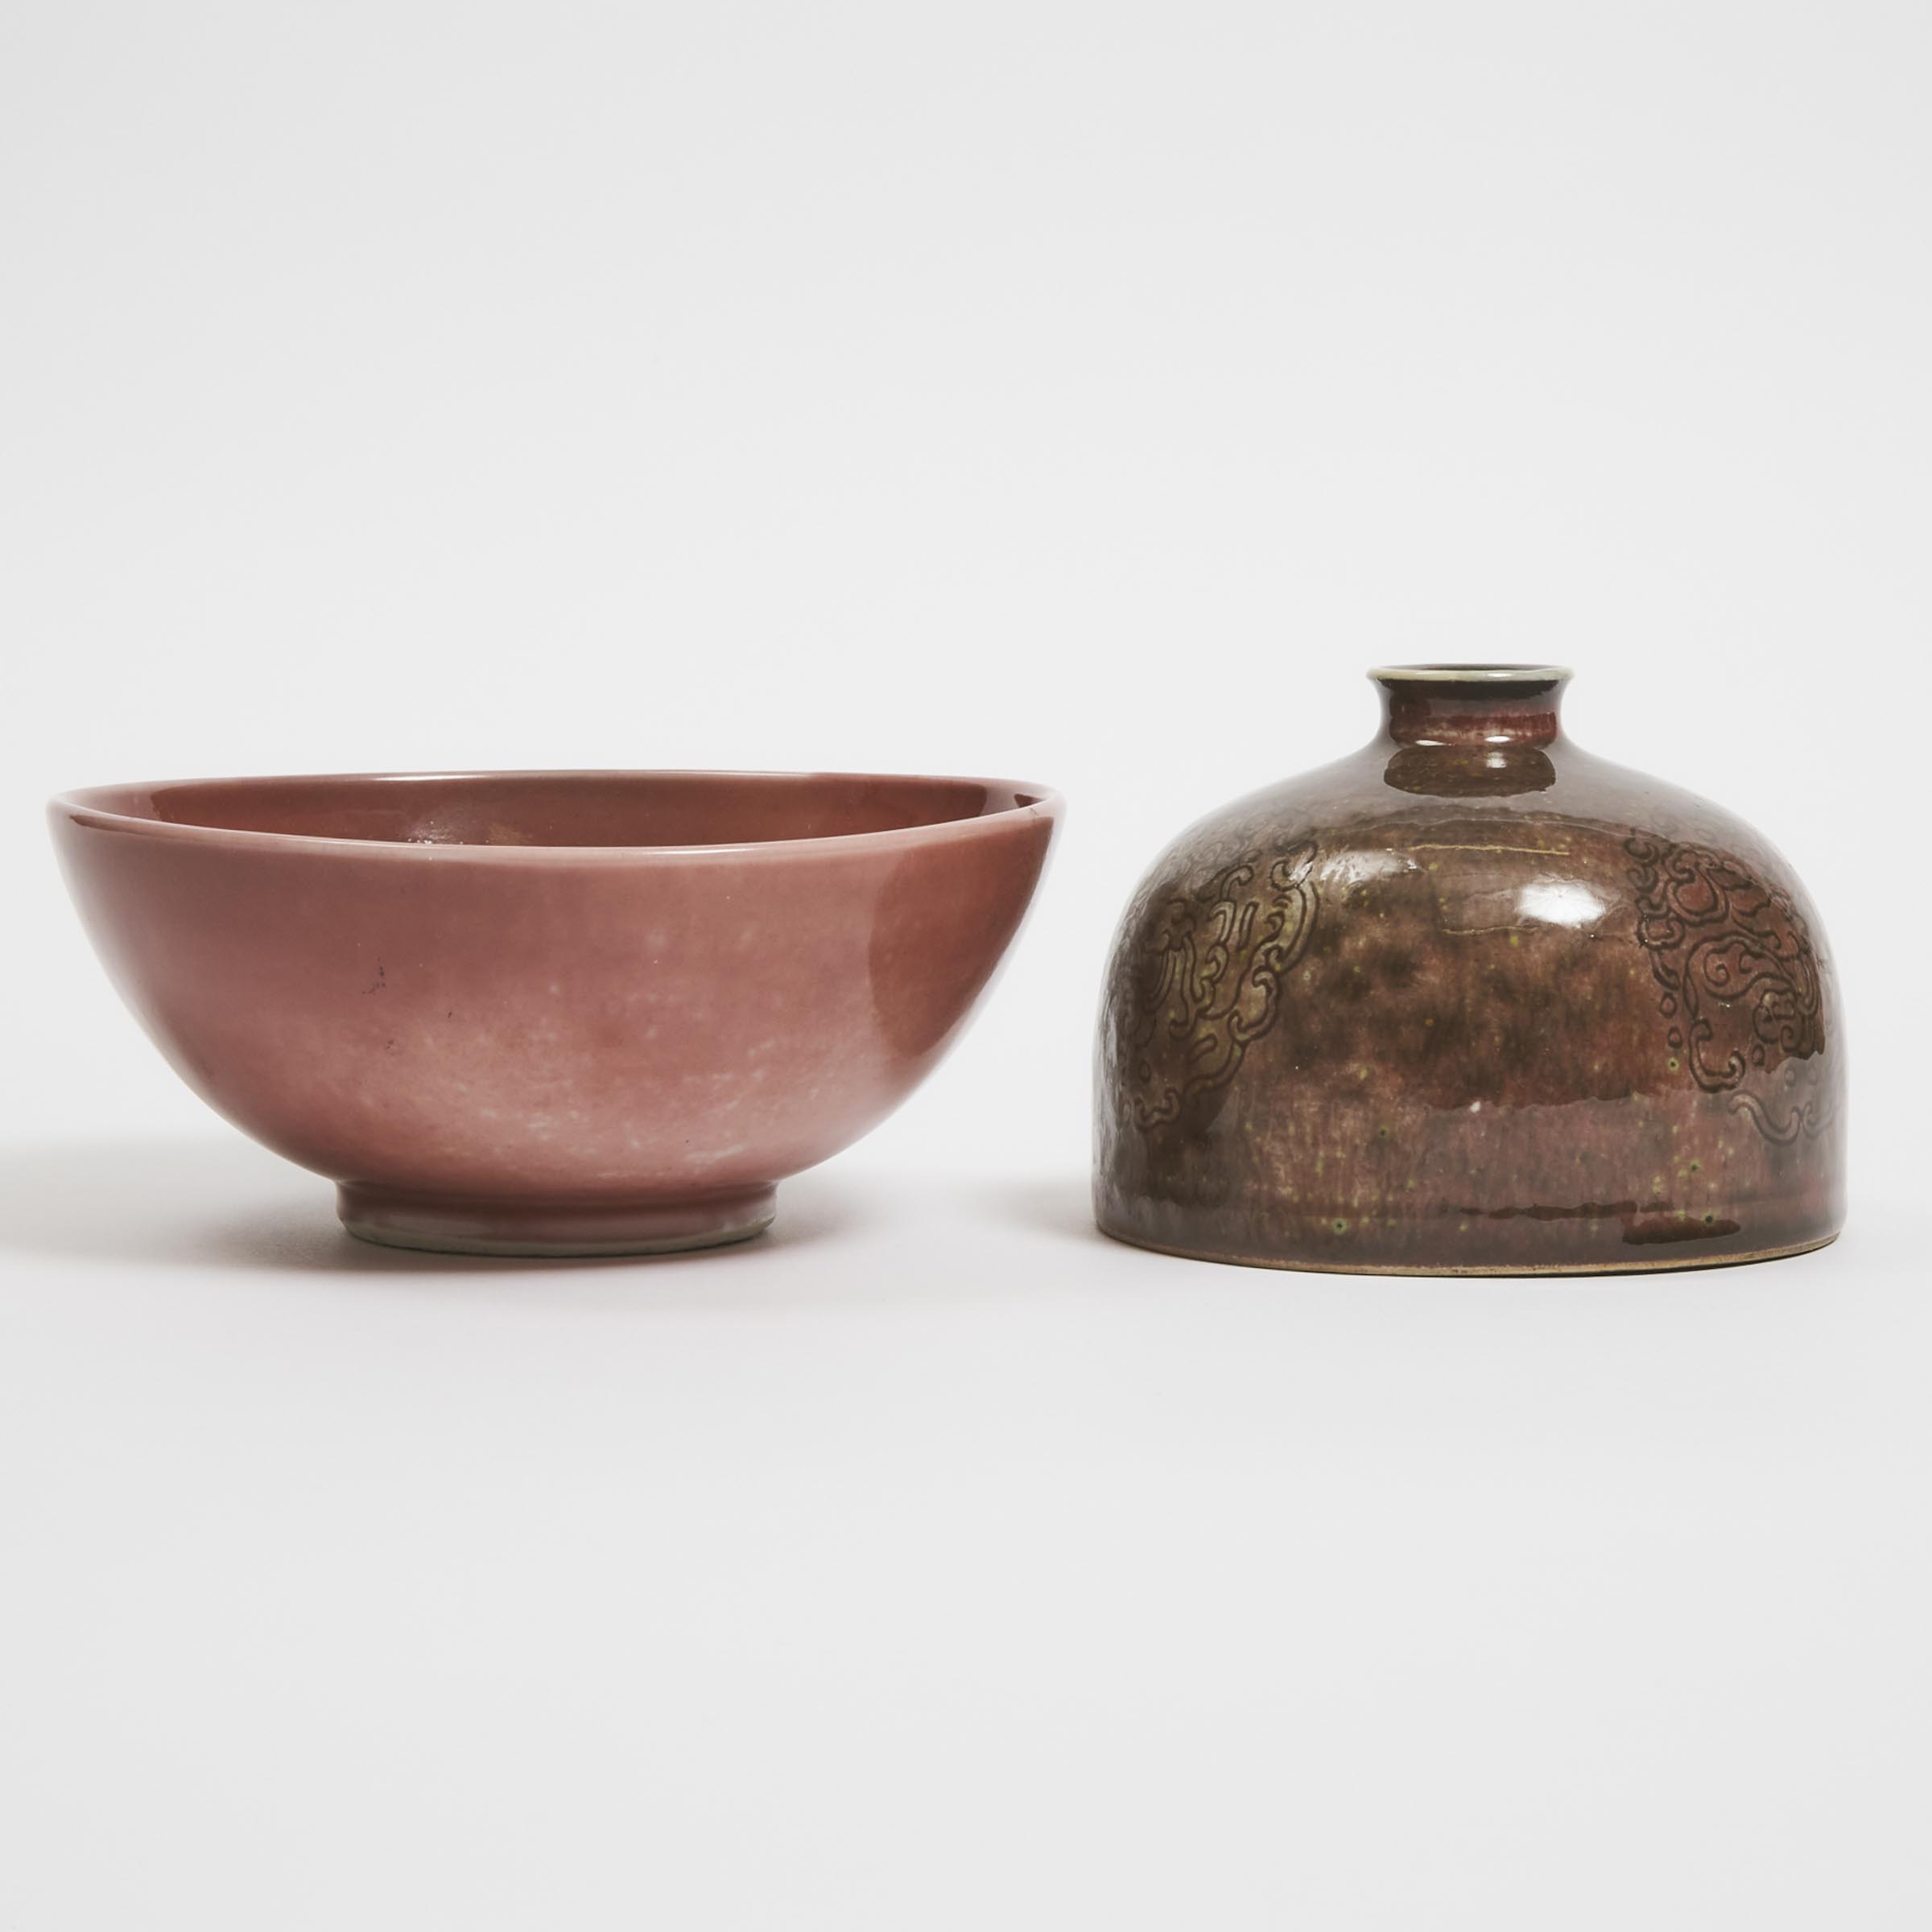 A Peachbloom-Glazed Beehive Water Pot (Taibai Zun), Kangxi Mark, 19th Century, Together With a Peachbloom-Glazed Bowl, 18th Century